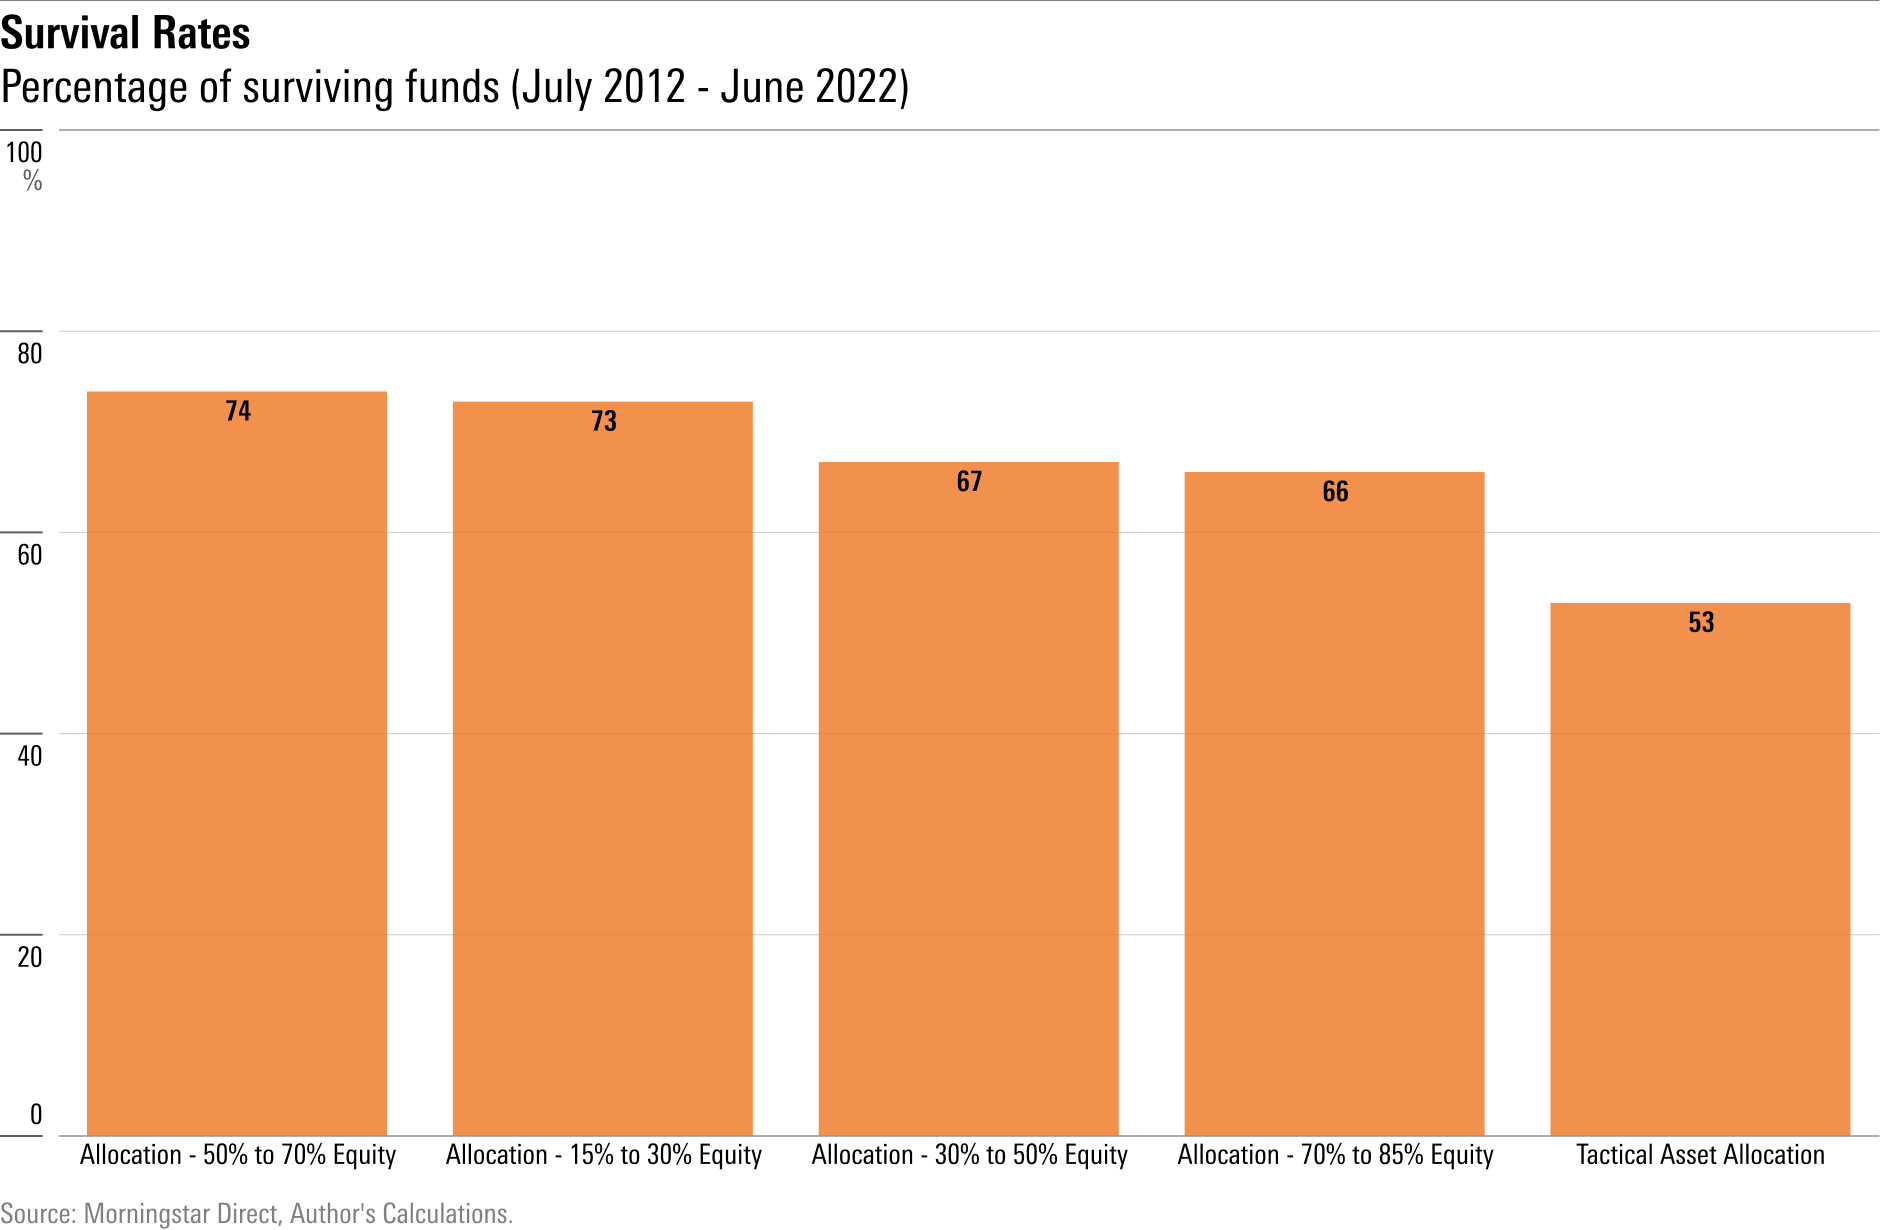 The percentage of tactical funds in each category that survived the 2012-2022 period. Tactical funds were more likely to vanish than other allocation funds.